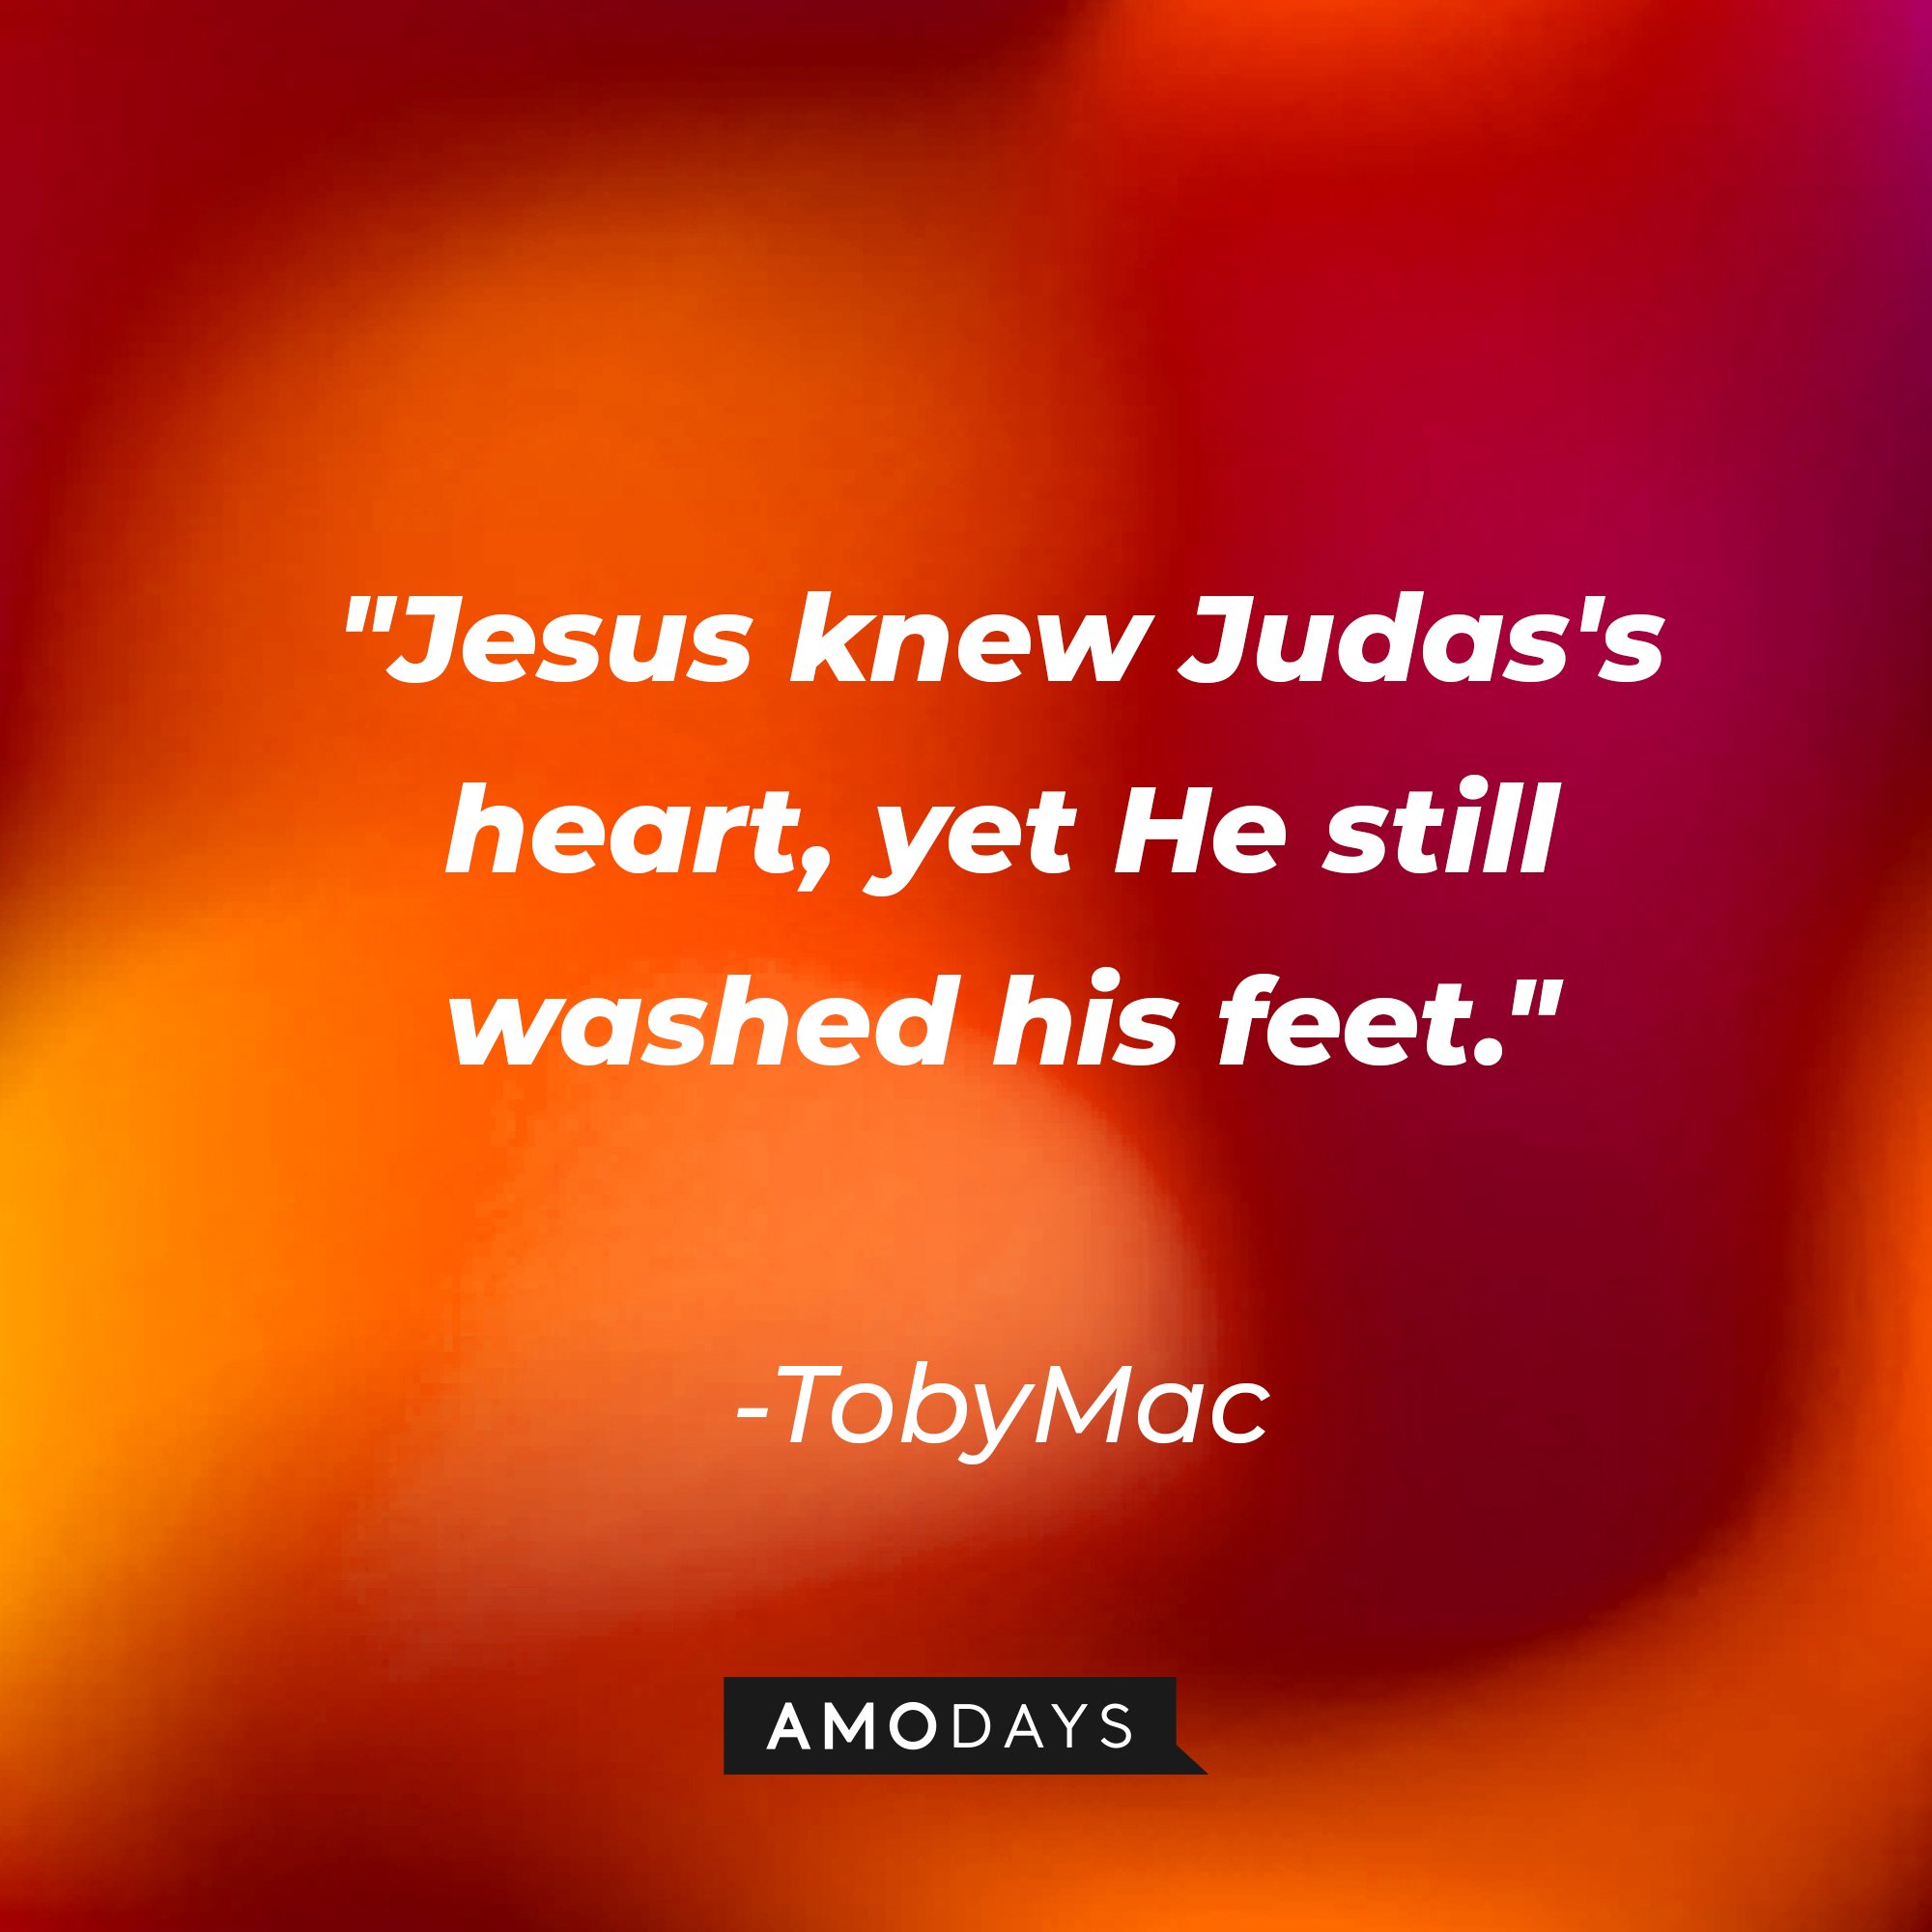 TobyMac's quote: "Jesus knew Judas's heart, yet He still washed his feet." | Image: AmoDays